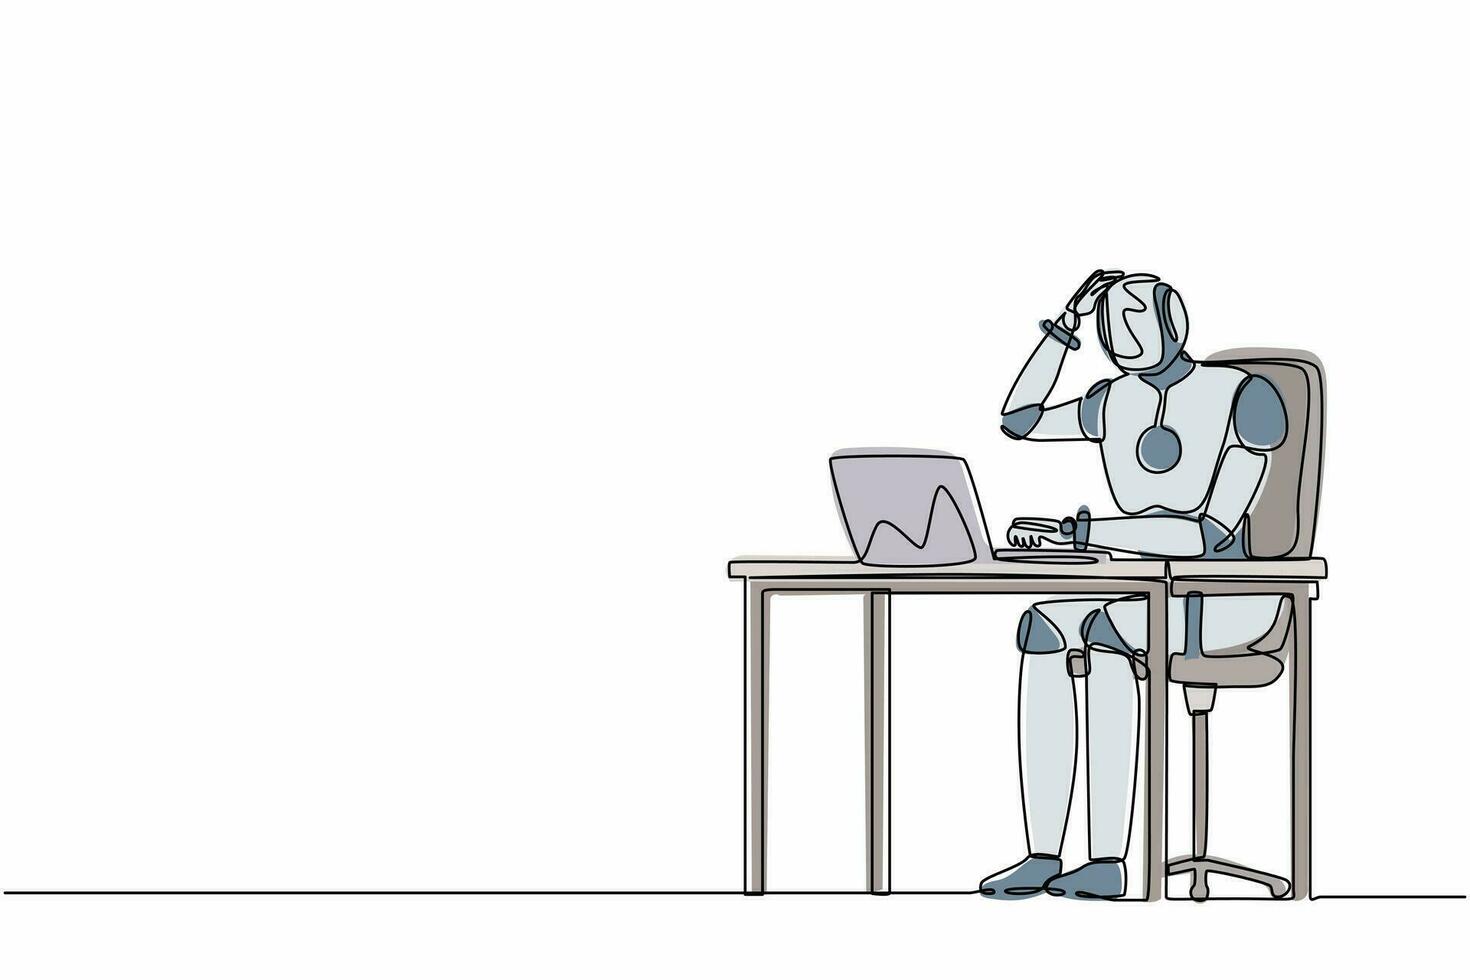 Single one line drawing confused robot manager working on computer laptop. Future technology development. Artificial intelligence and machine learning. Continuous line draw design vector illustration